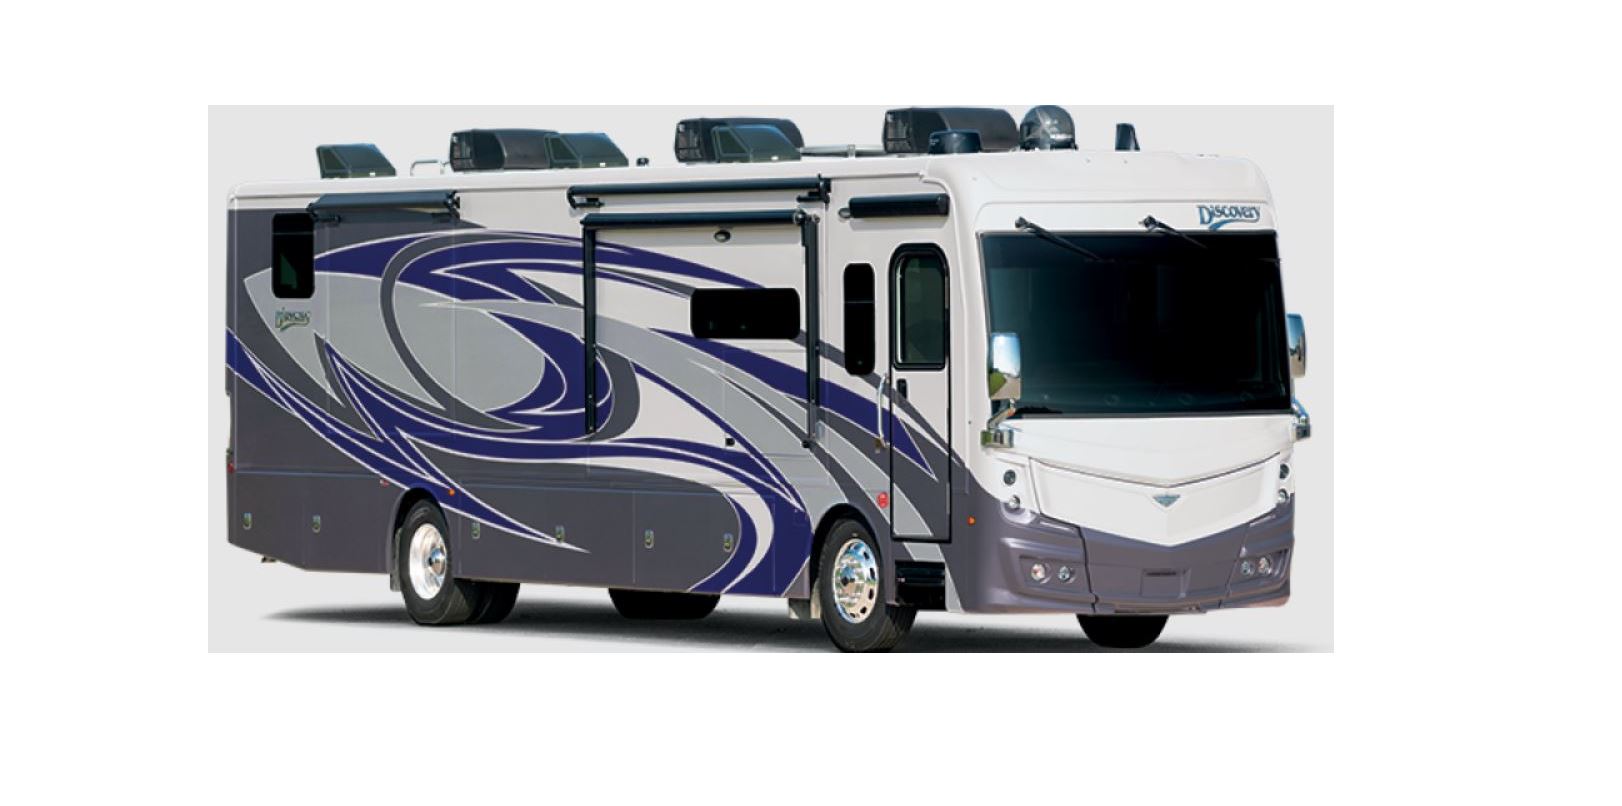 2022 Fleetwood RV Discovery featured